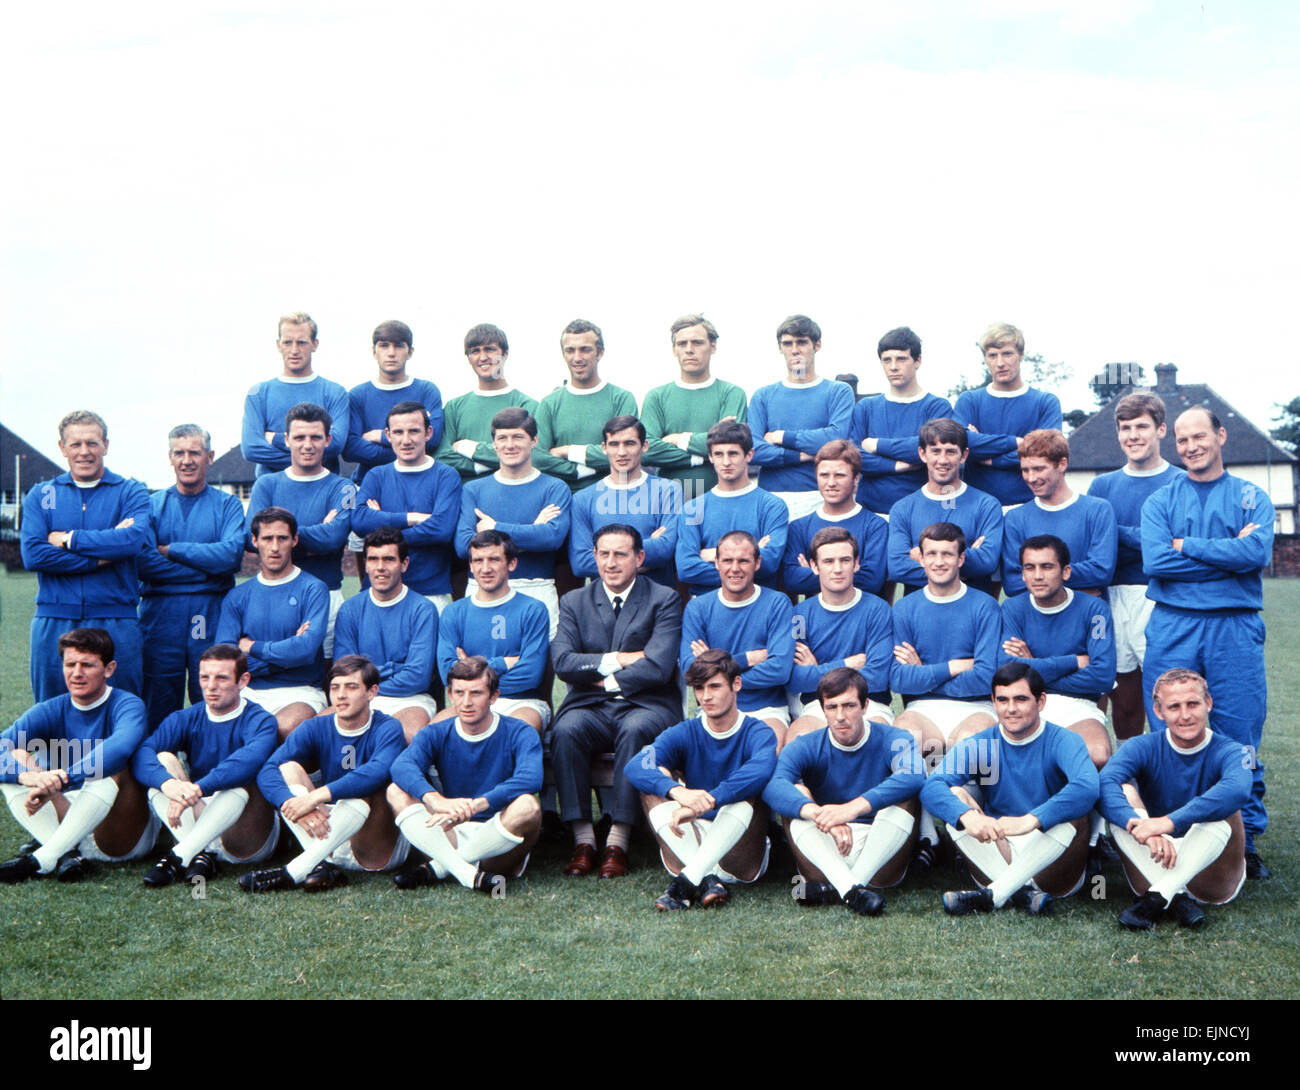 everton-squad-pose-for-a-group-photograph-back-row-left-to-right-sandy-EJNCYJ.jpg